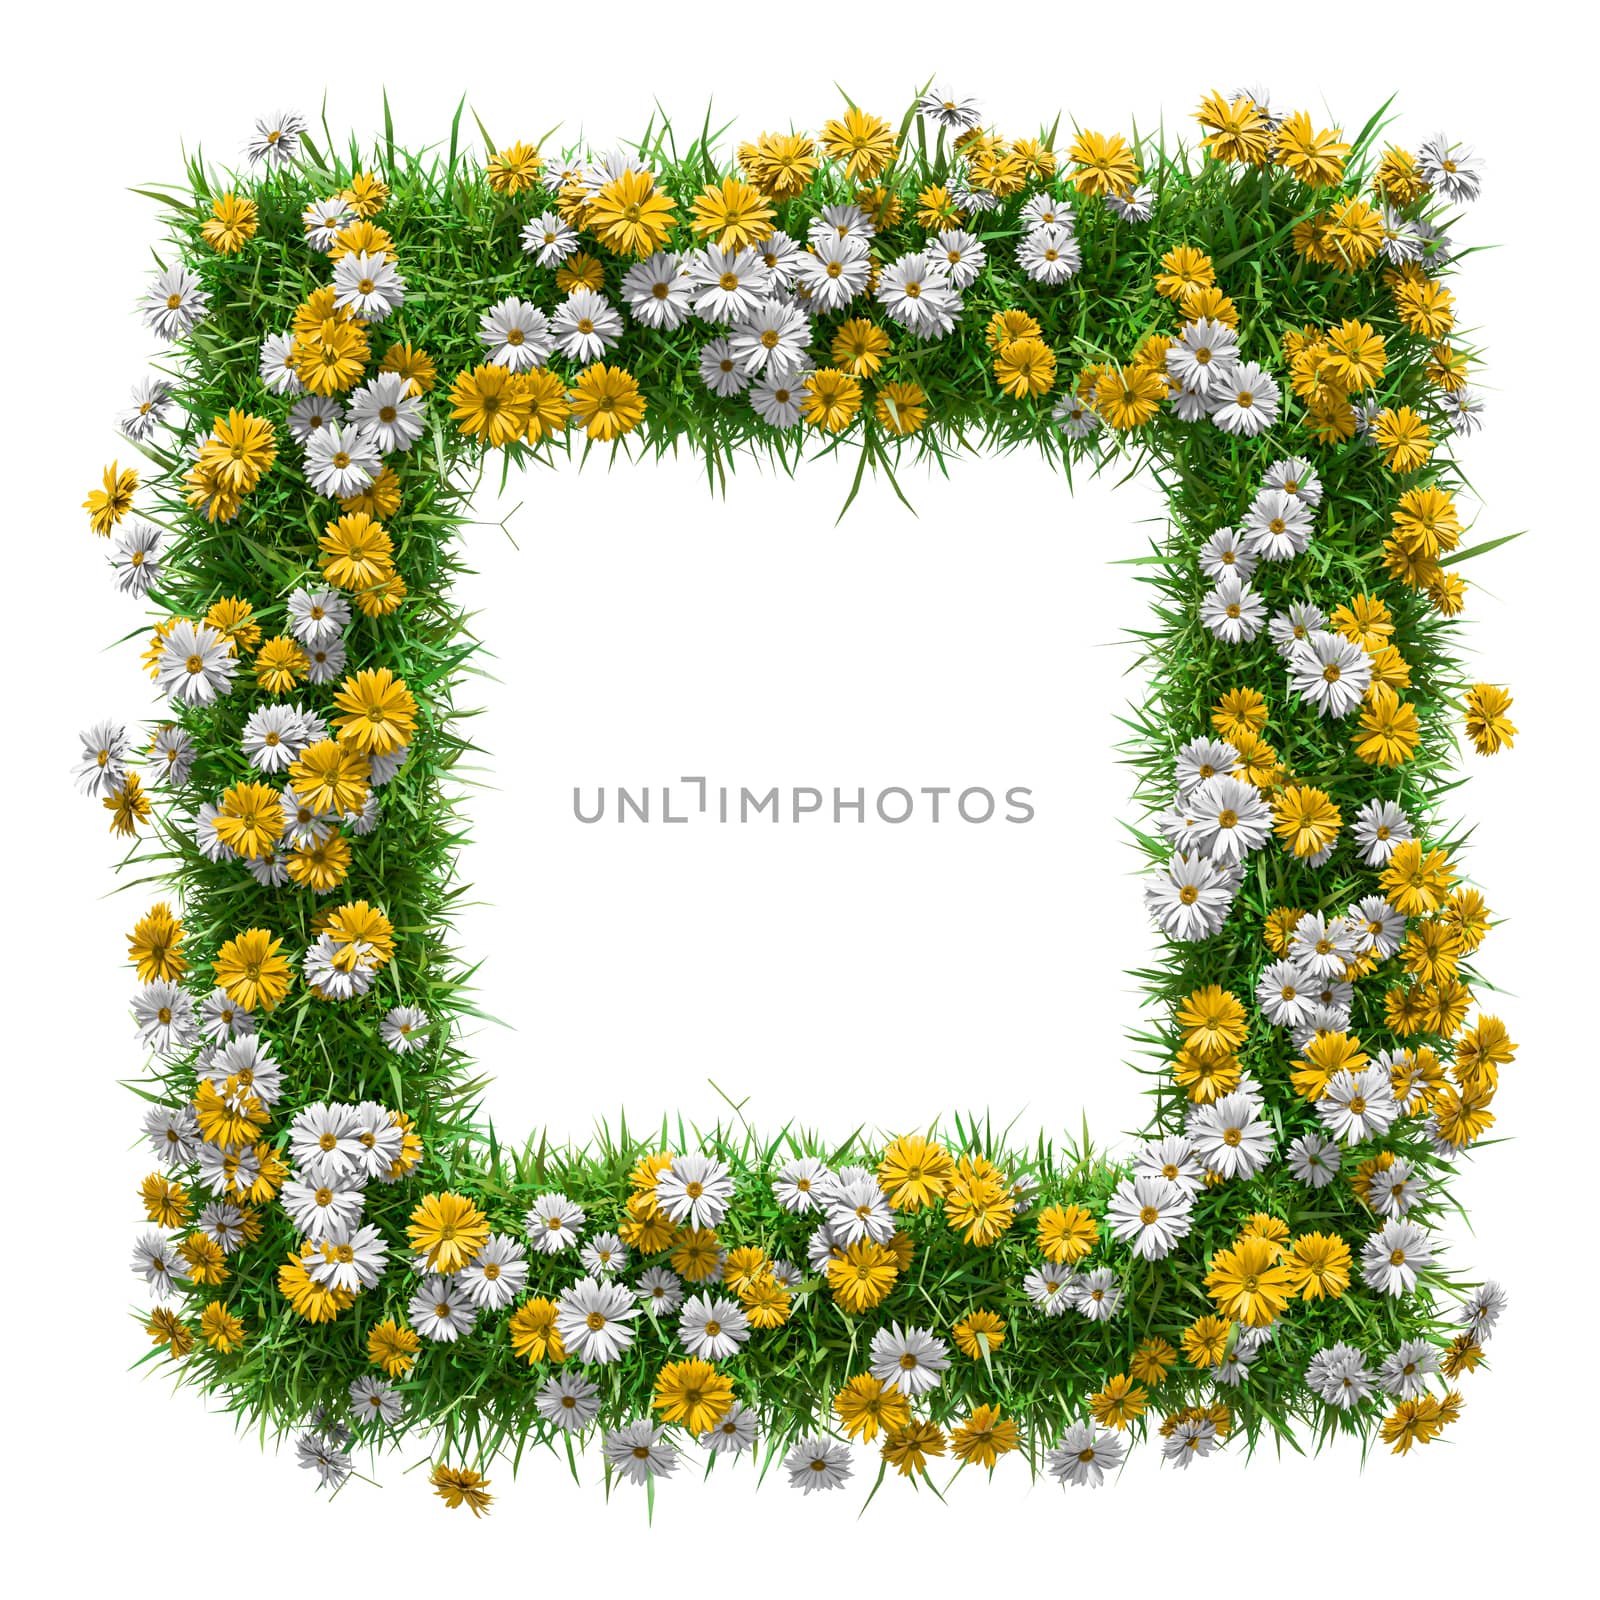 Flowers and green grass frame, top view on white background. Template for your design. 3D illustration